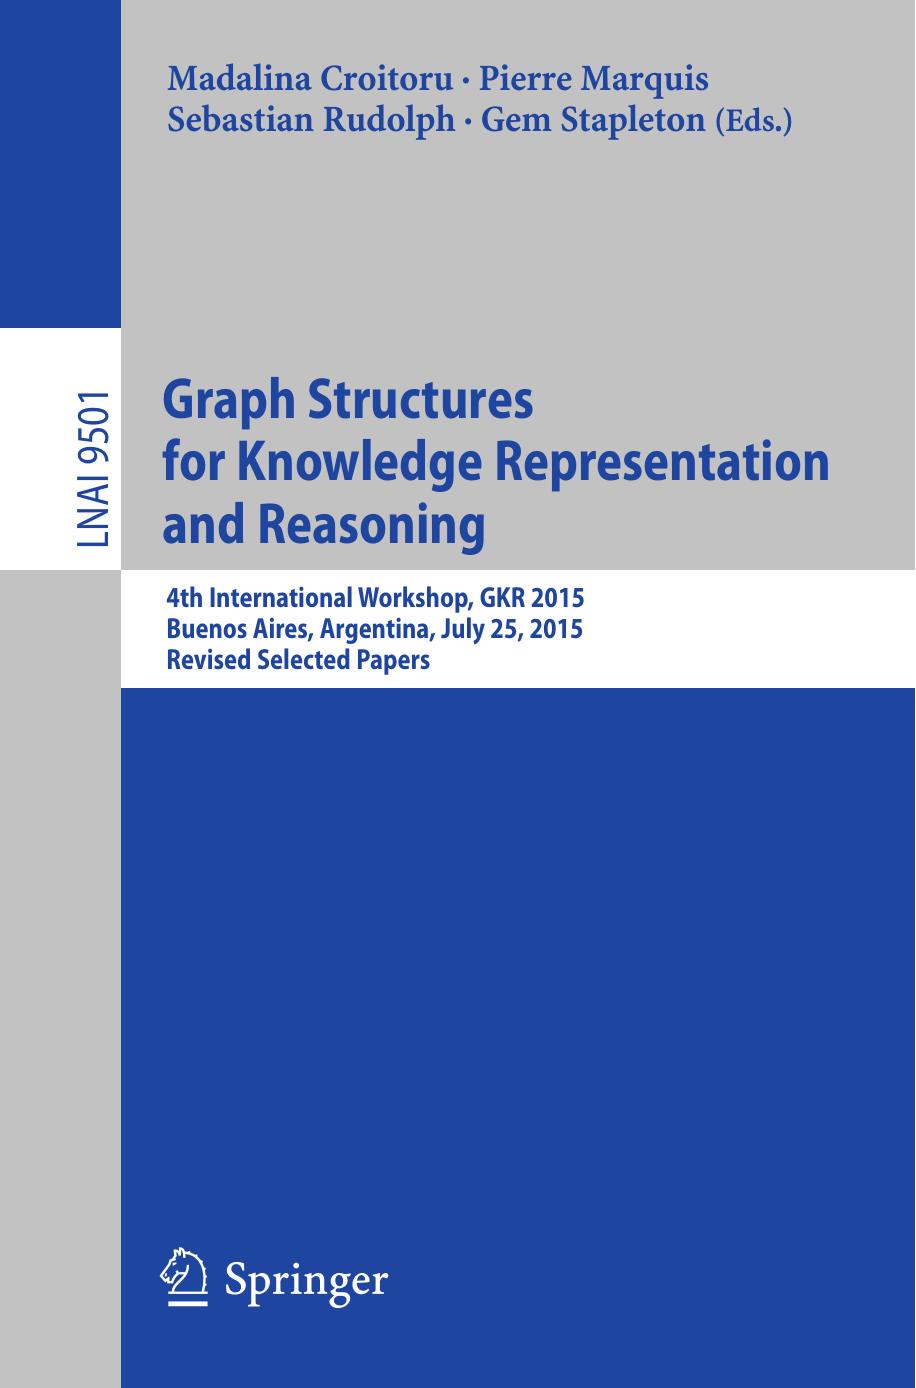 Graph Structures for Knowledge Representation and Reasoning: 4th International Workshop, GKR 2015, Buenos Aires, Argentina, July 25, 2015, Revised Selected Papers